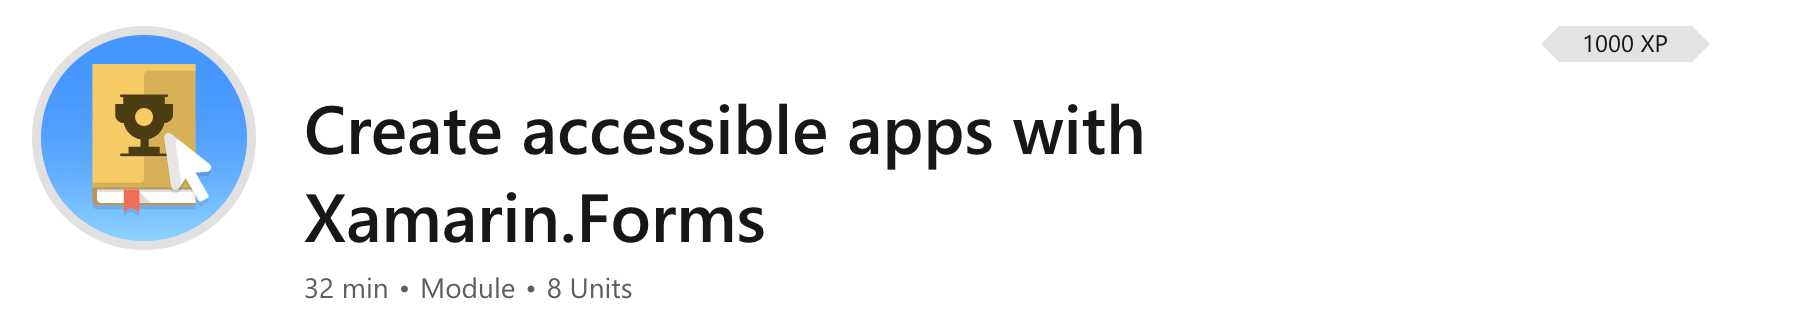 Create accessible apps with Xamarin.Forms module